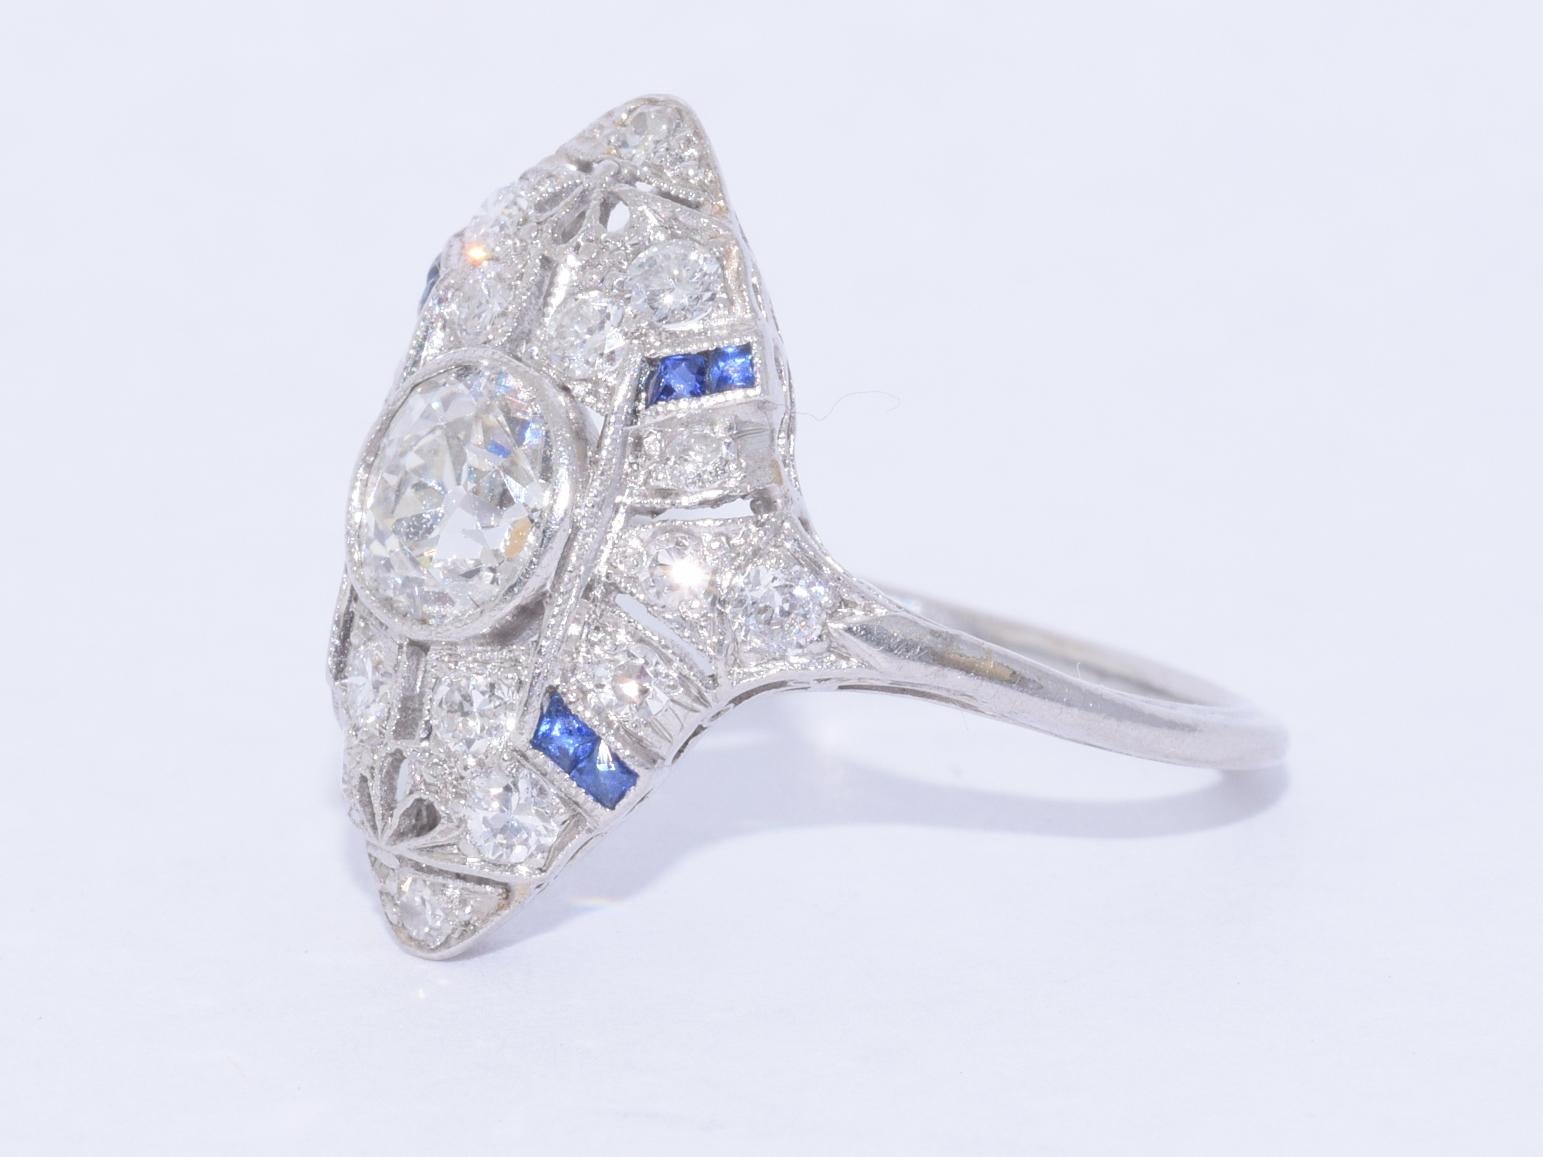 An old European diamond weighing approximately 0.65 carat, of approximately J/SI quality, is accented with single cut diamonds totaling approximately 0.35 carat and calibré sapphires mounted in platinum.